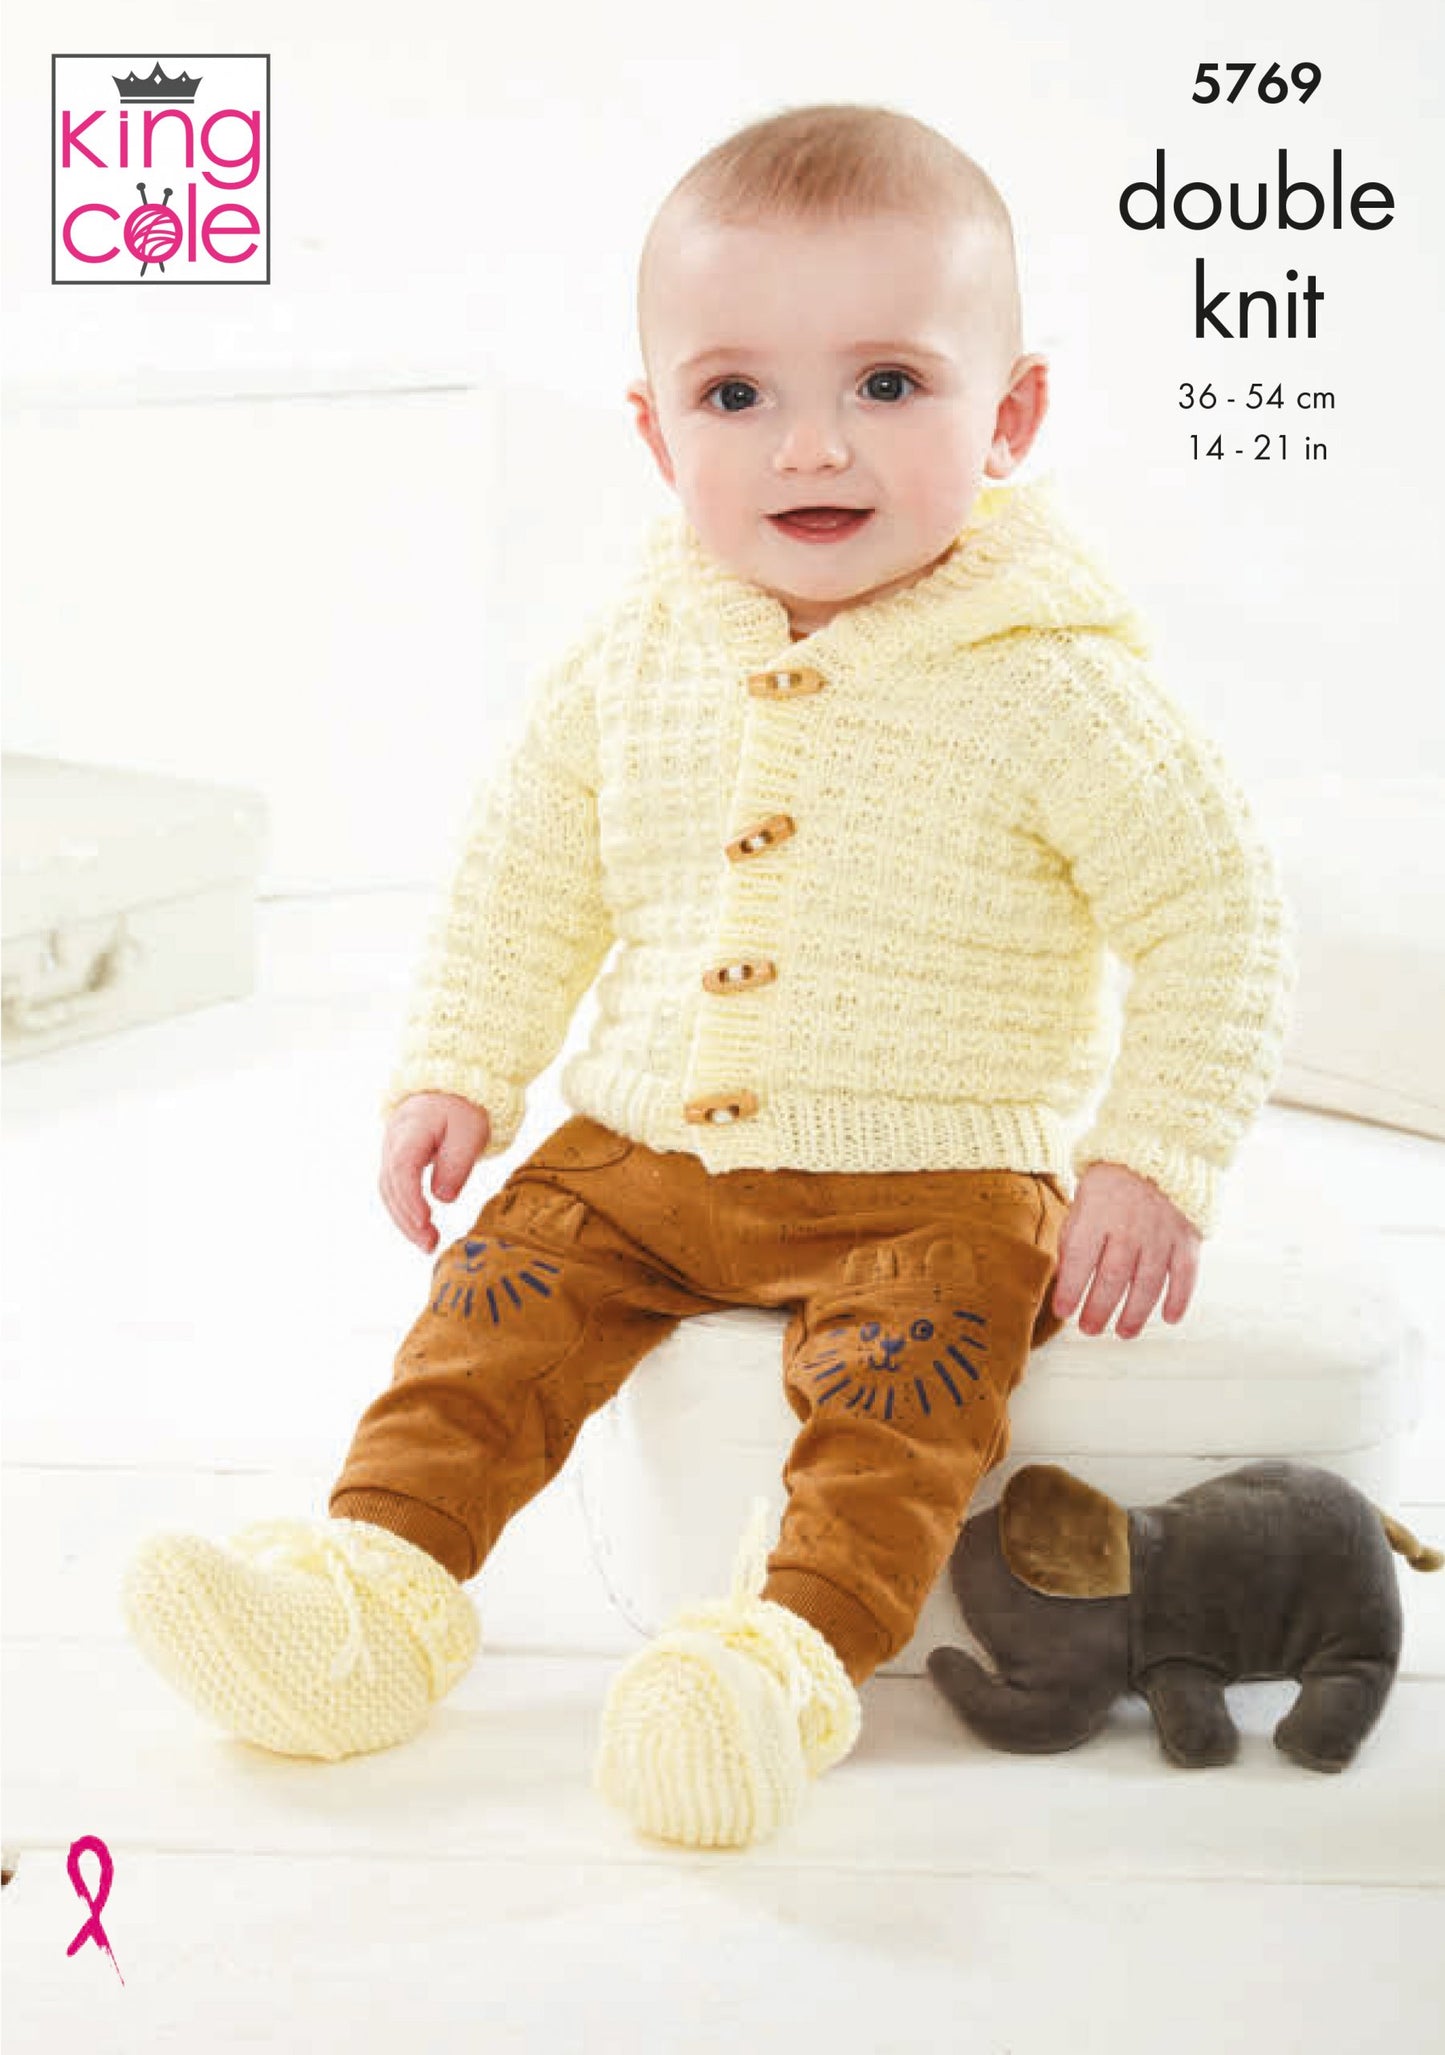 Knitting Pattern 5769 - Crossover Cardigan, Hooded Jacket, Booties & Blanket Knitted in Baby Safe DK